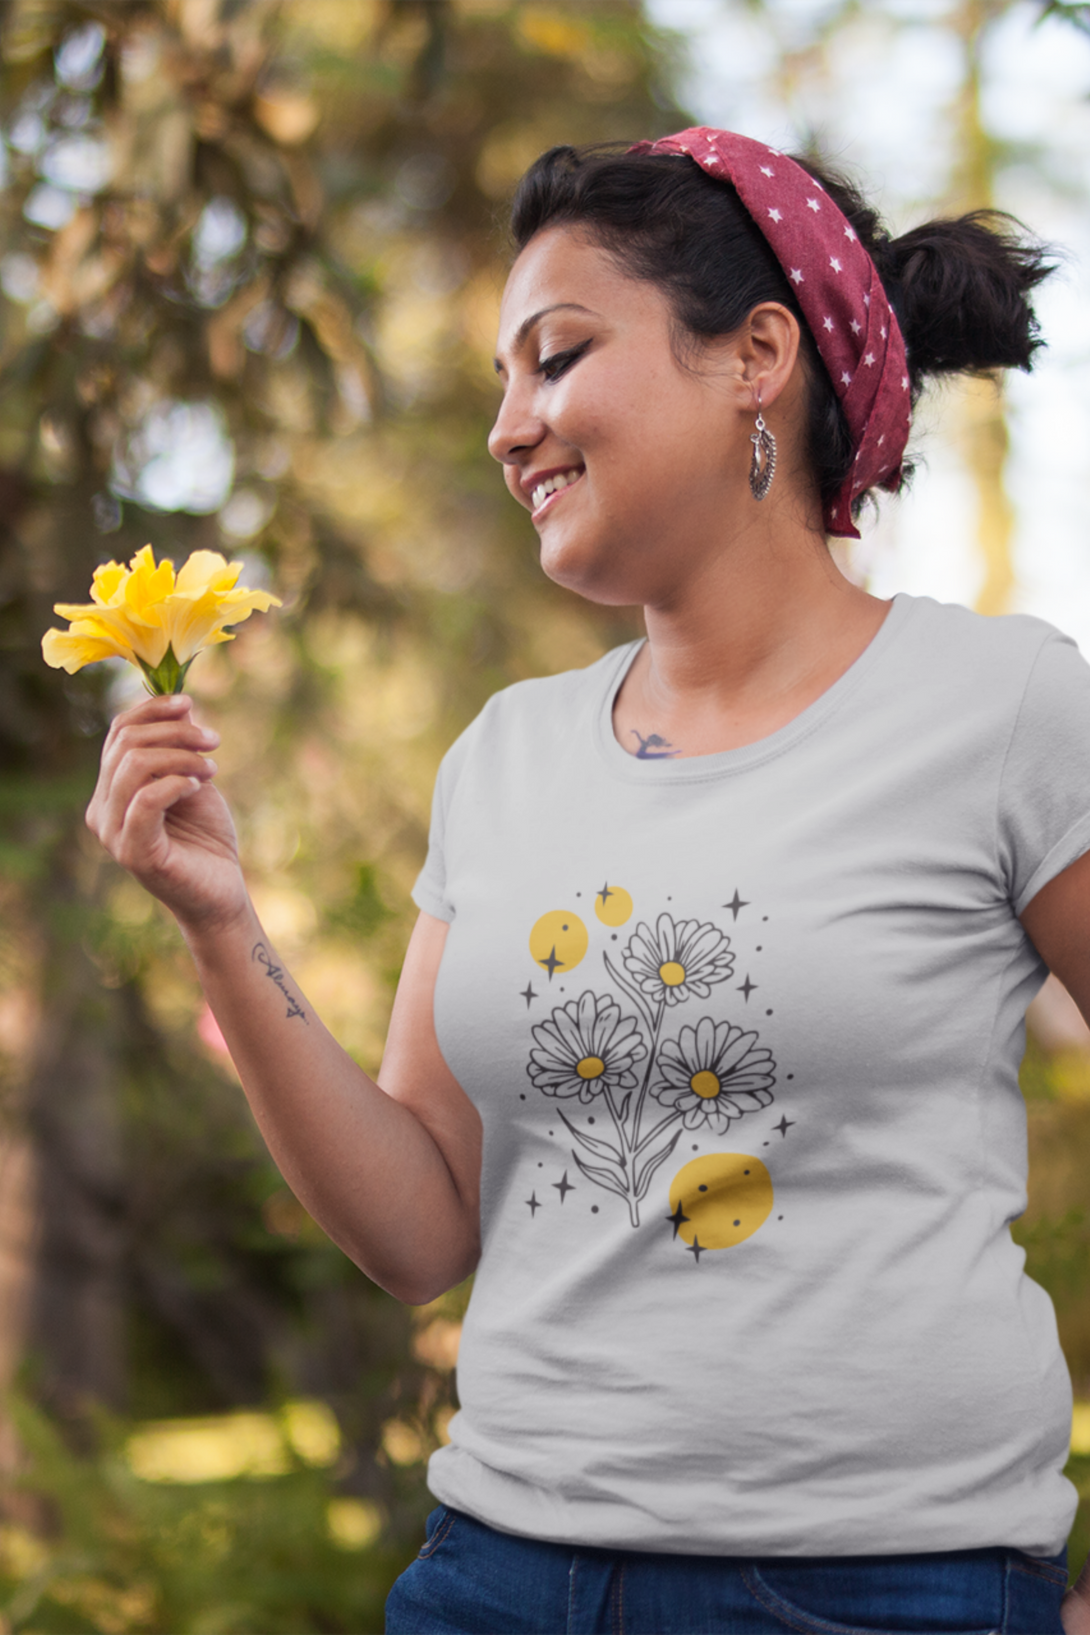 Sparkling Flowers Printed T-Shirt For Women - WowWaves - 5